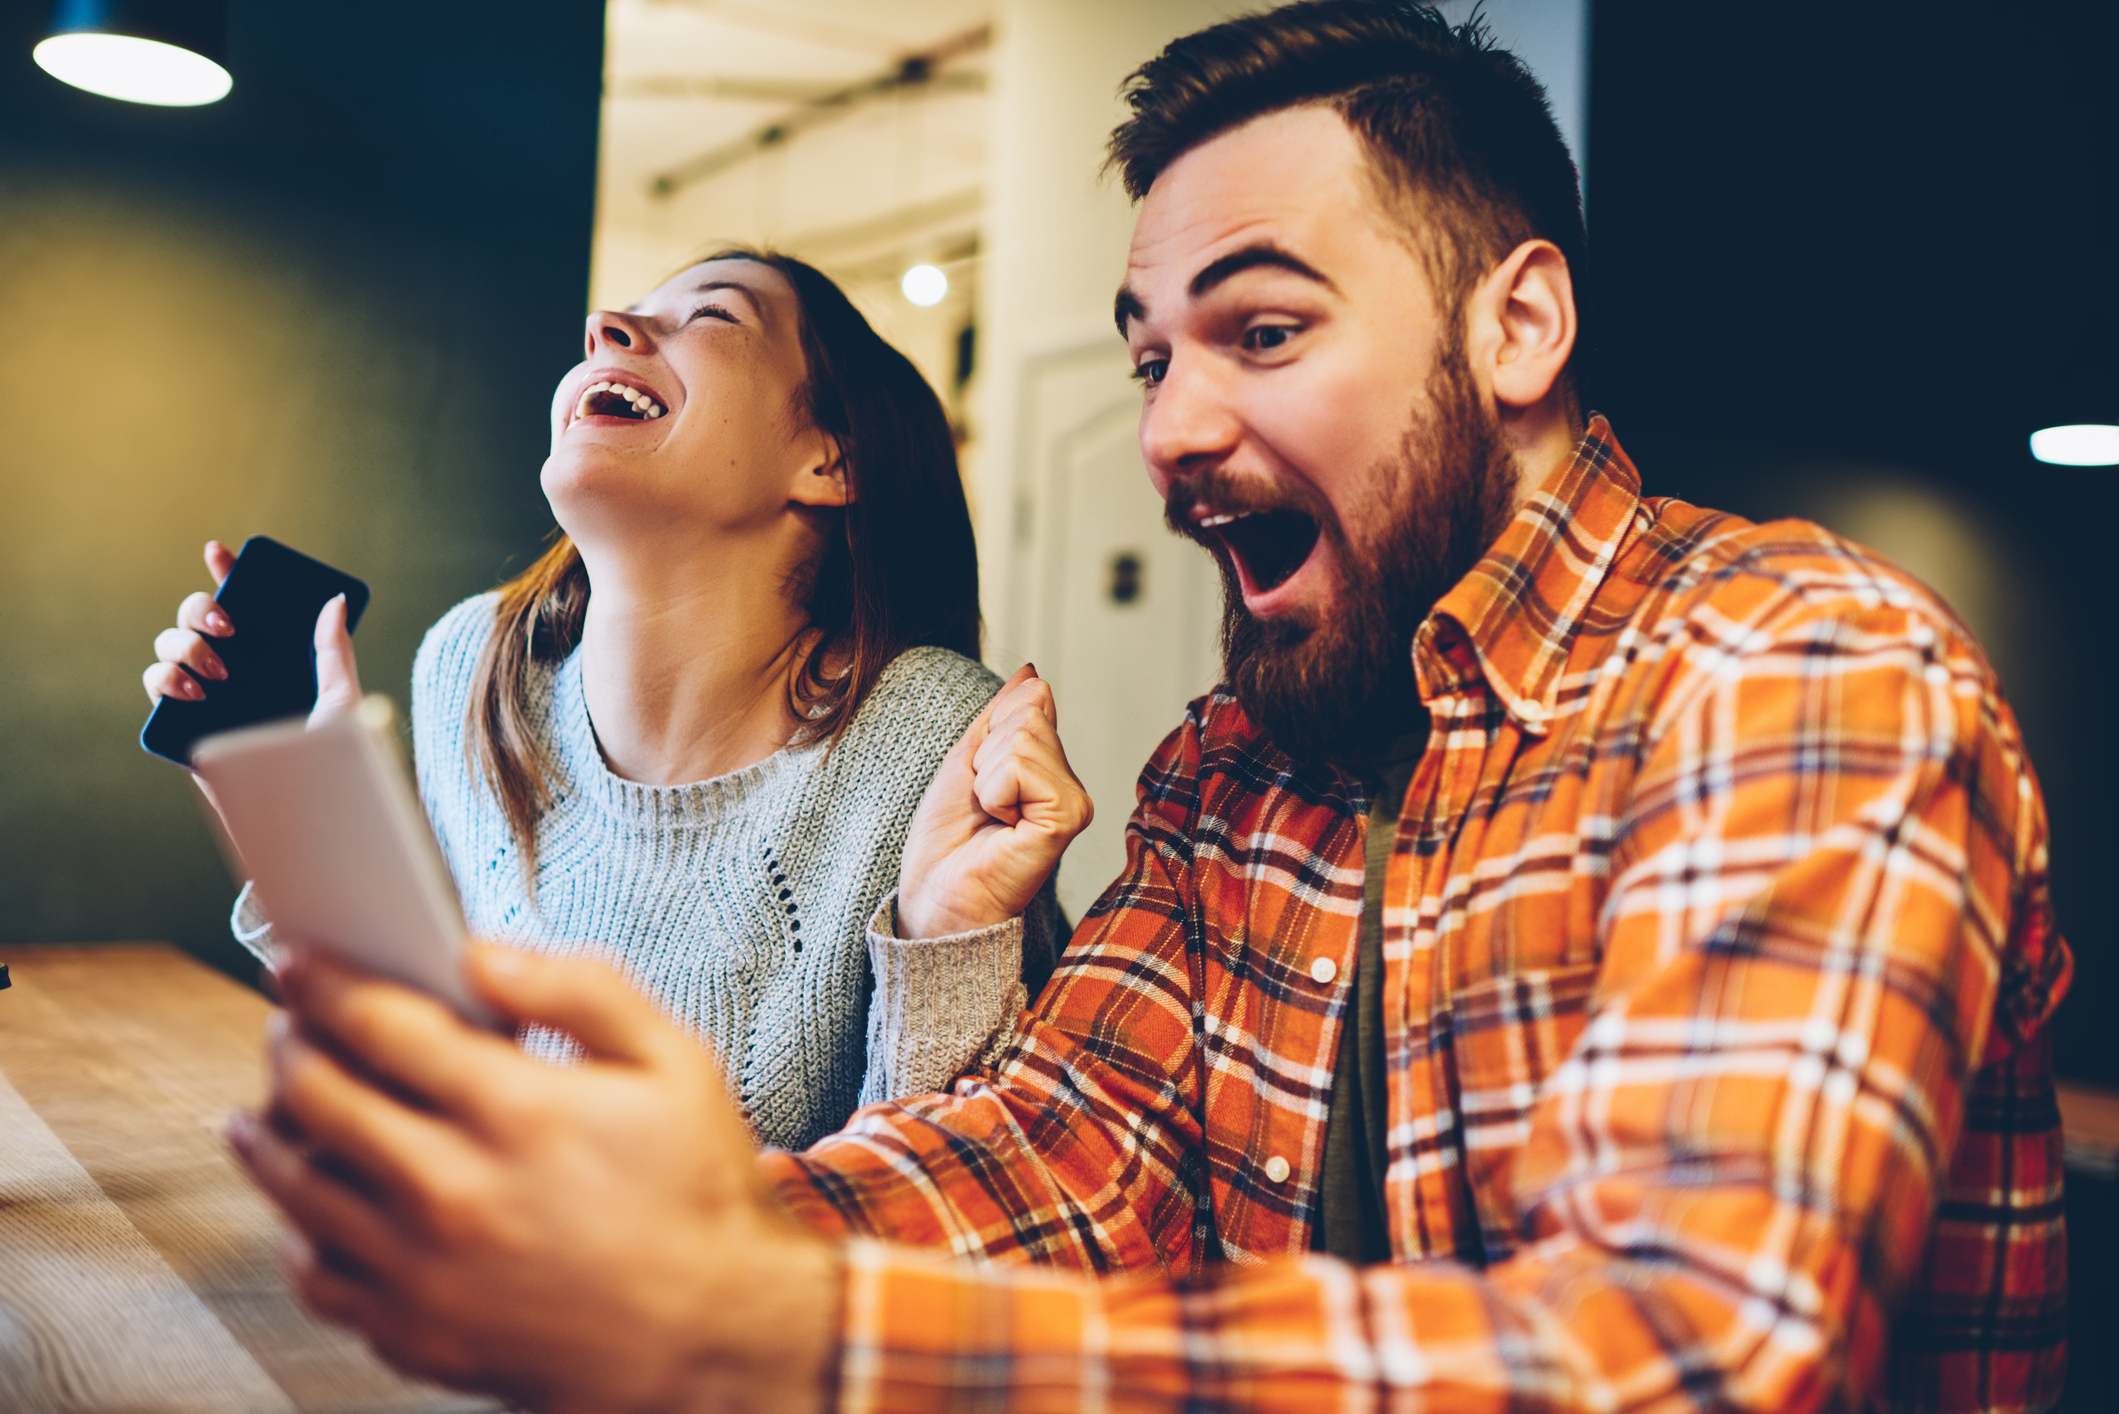 Stock Image of a Man and Woman Sitting Together And Laughing While Looking At Their Cell Phone Screens